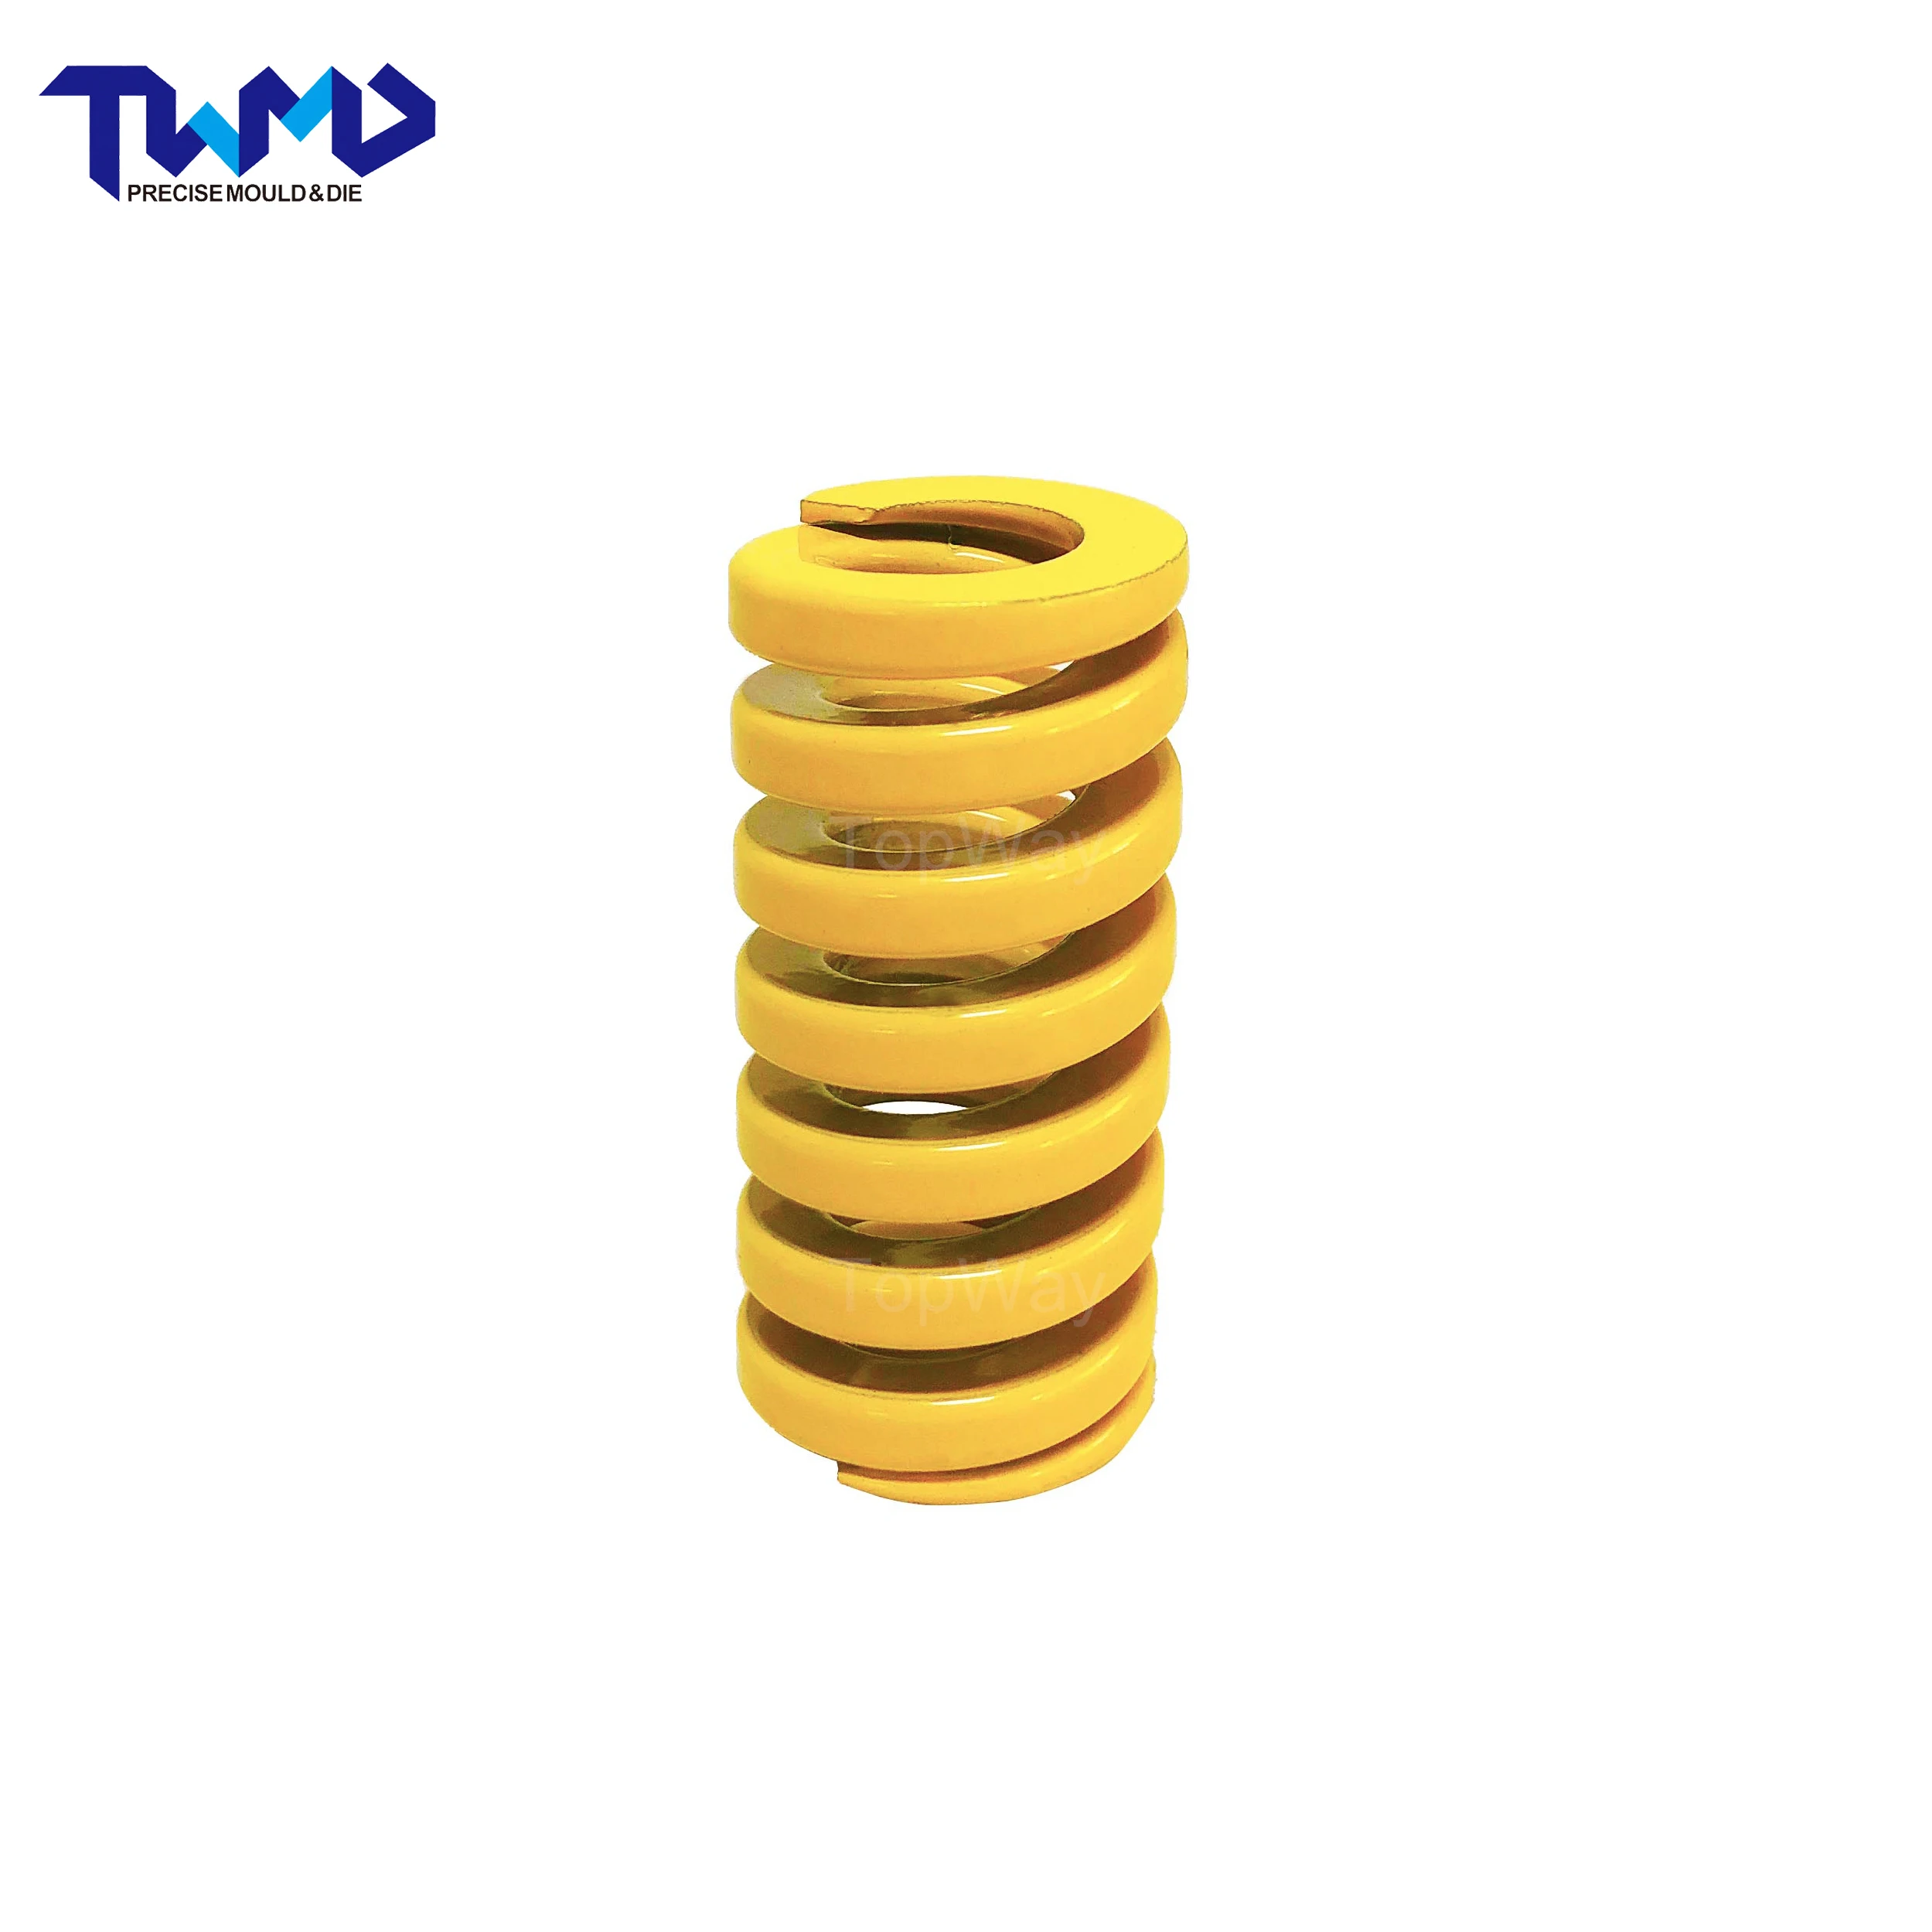 
ISO 10243 rectangular compression extra heavy load die mould spring  (62225402516)